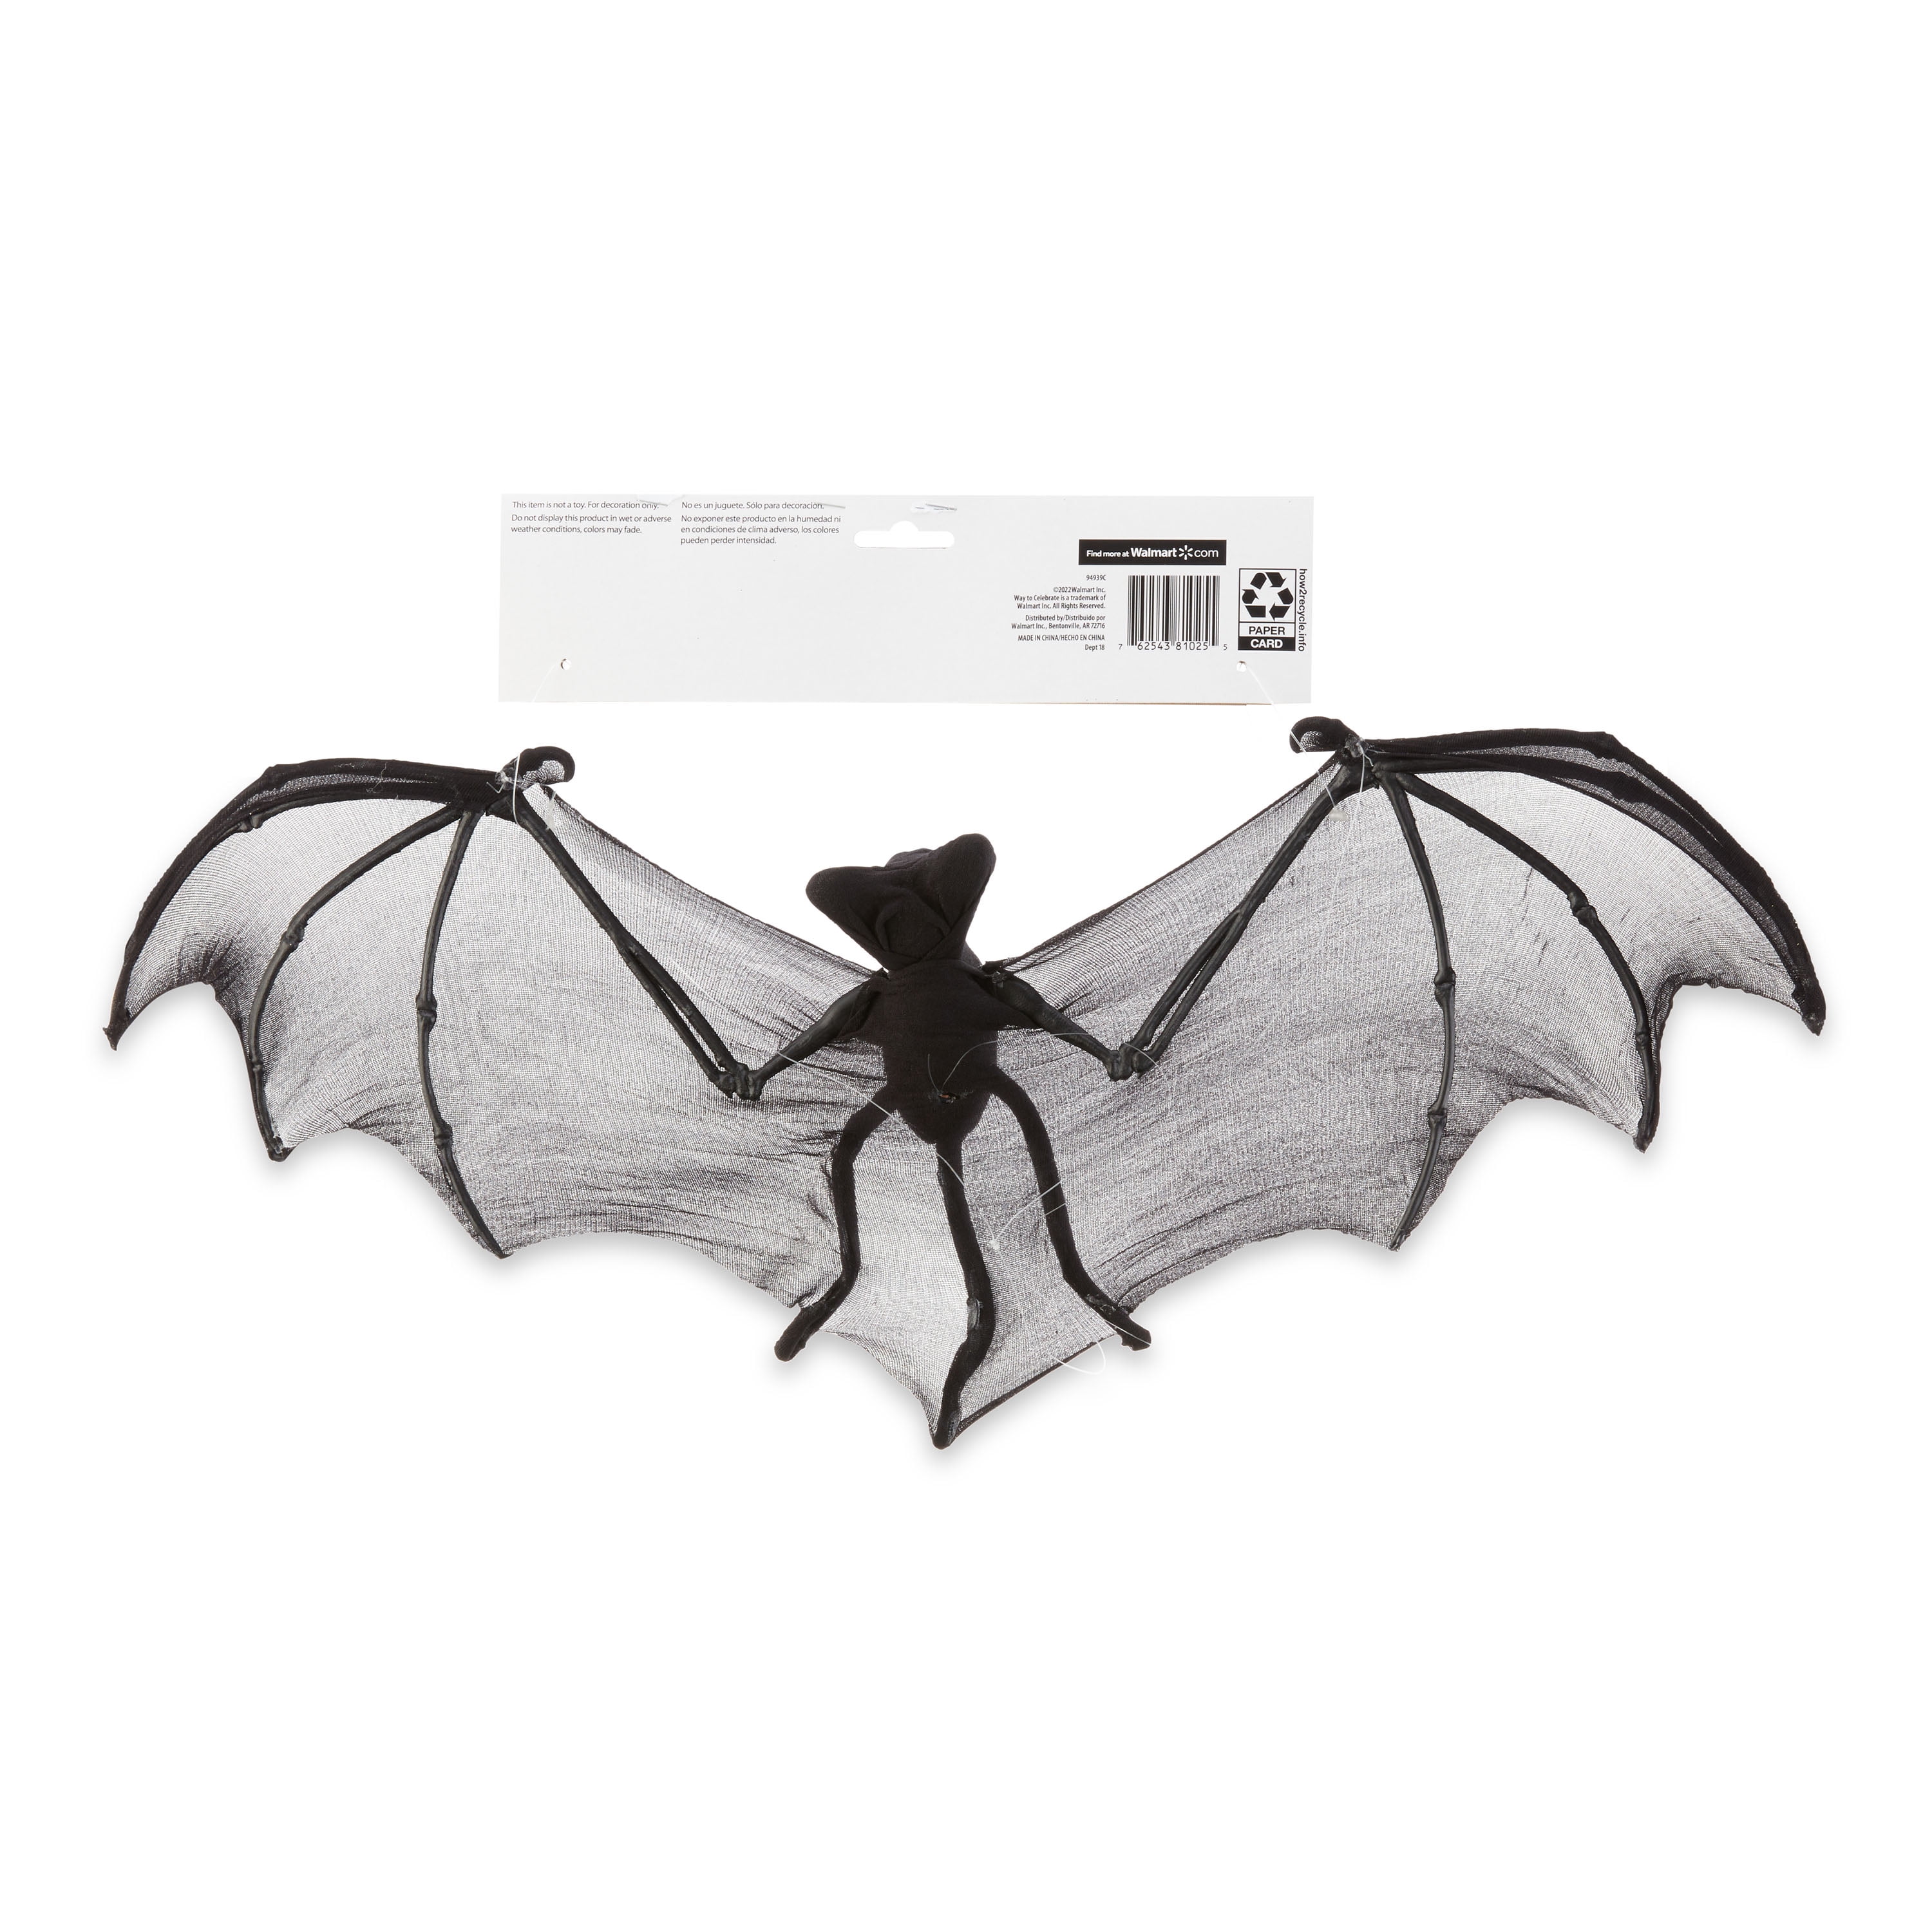 Andaz Press 100-pk Ghosts and Bats Halloween Gift Tags with String, Favor Bag Tags Halloween Decorations 2 x 3.75 inch, Black